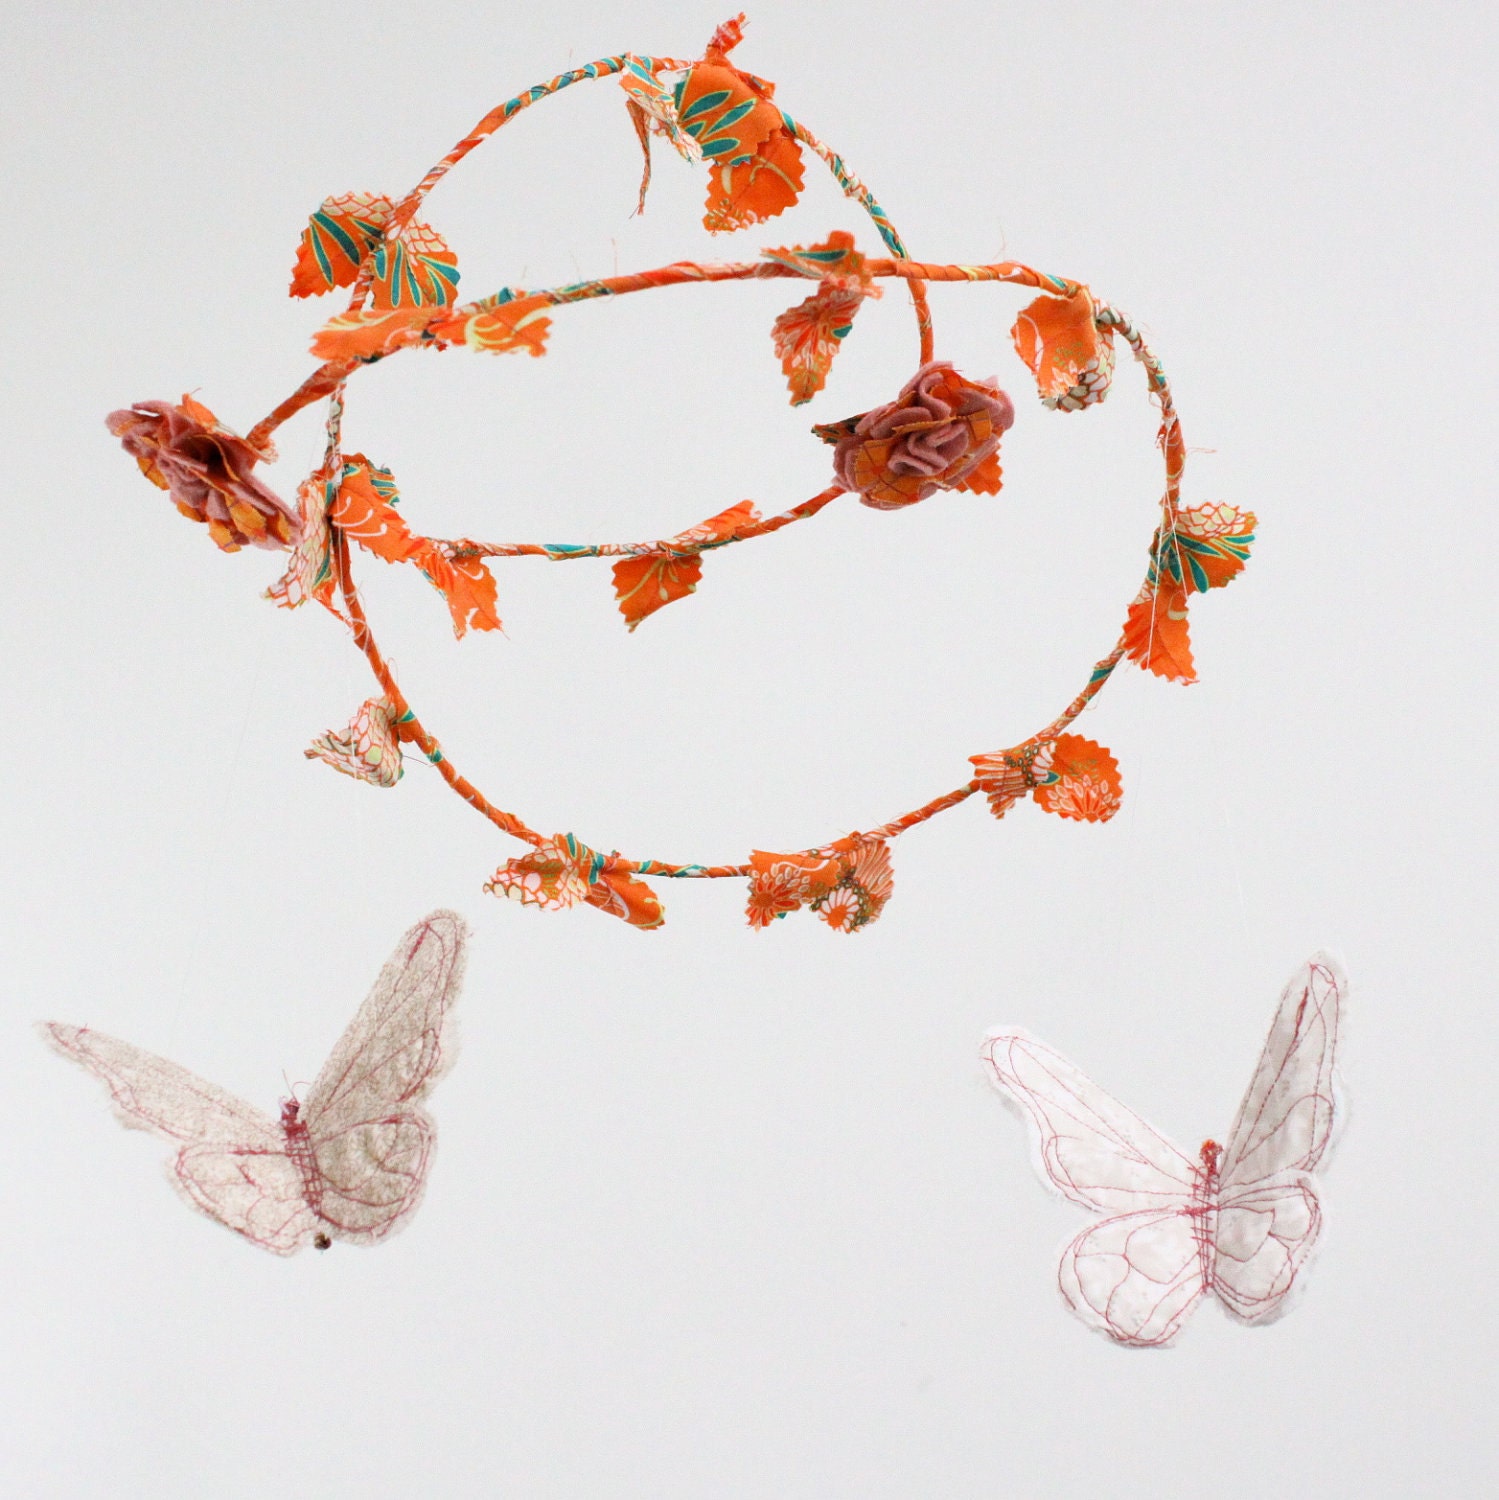 Butterfly Mobile - ballet in the garden - fabric in clementine orange, mango, cream, white, gold, dusty rose pink, and a touch of green